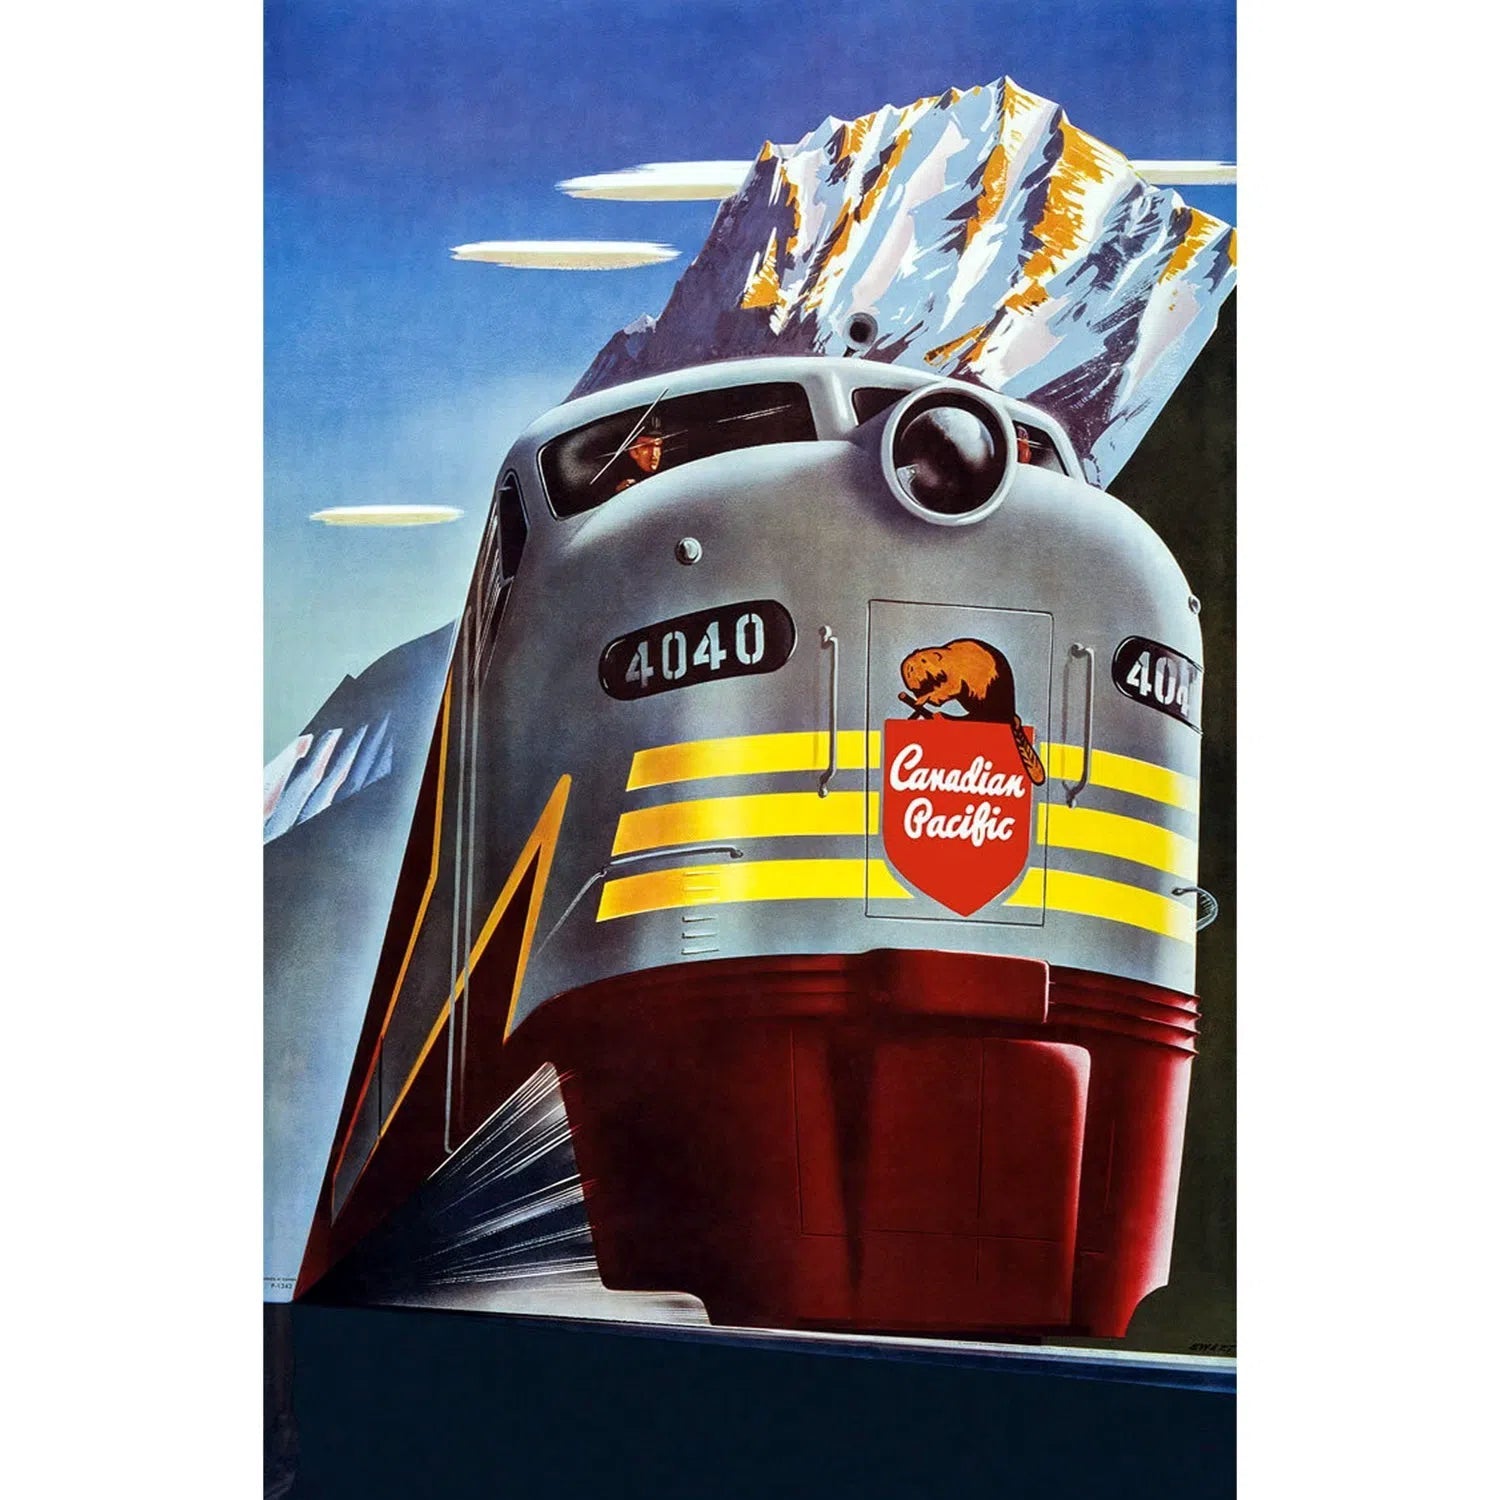 Canadian pacific-Imagesdartistes